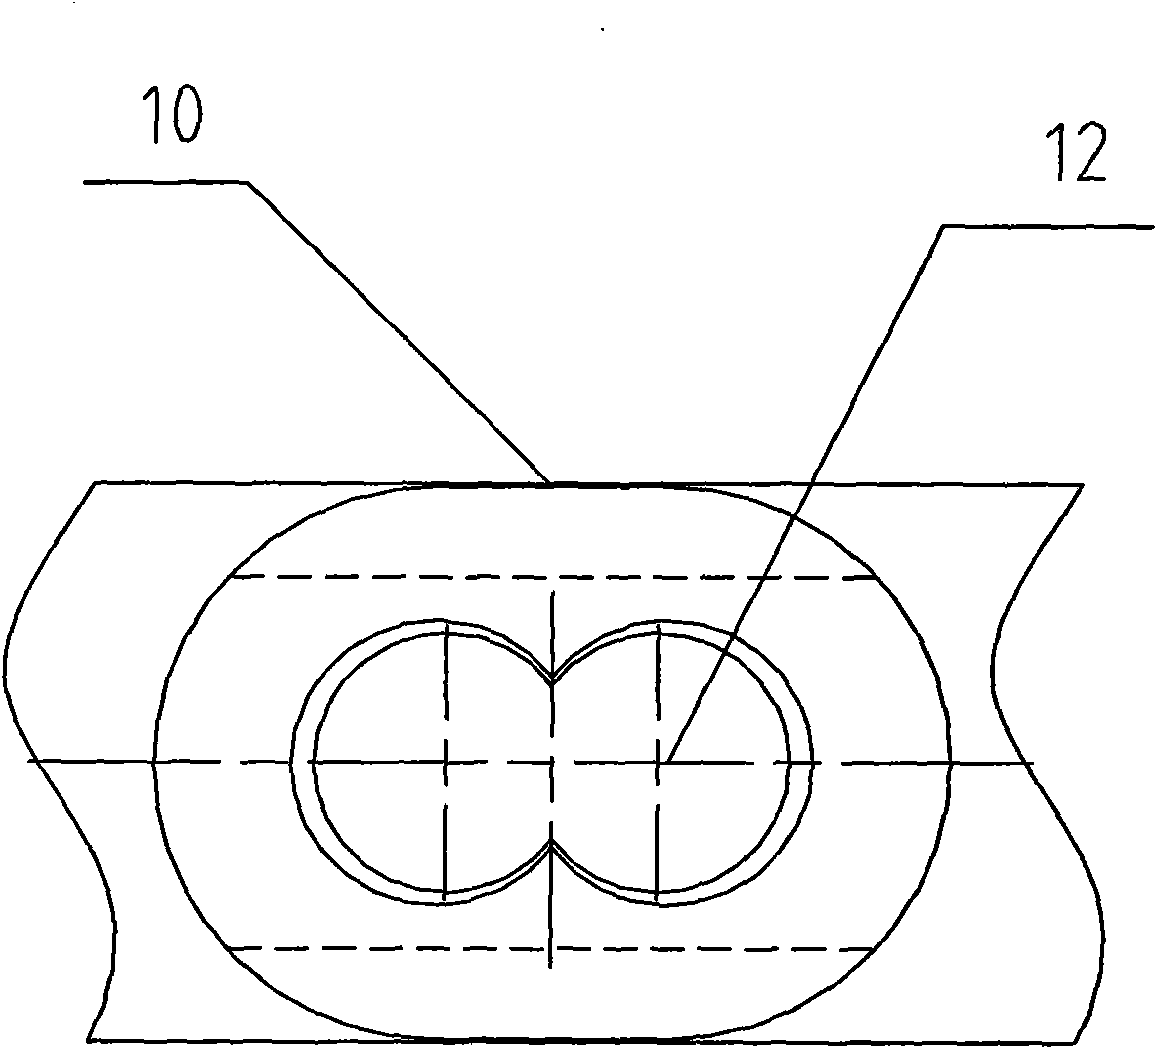 Feeding cylinder with single screw and double cones